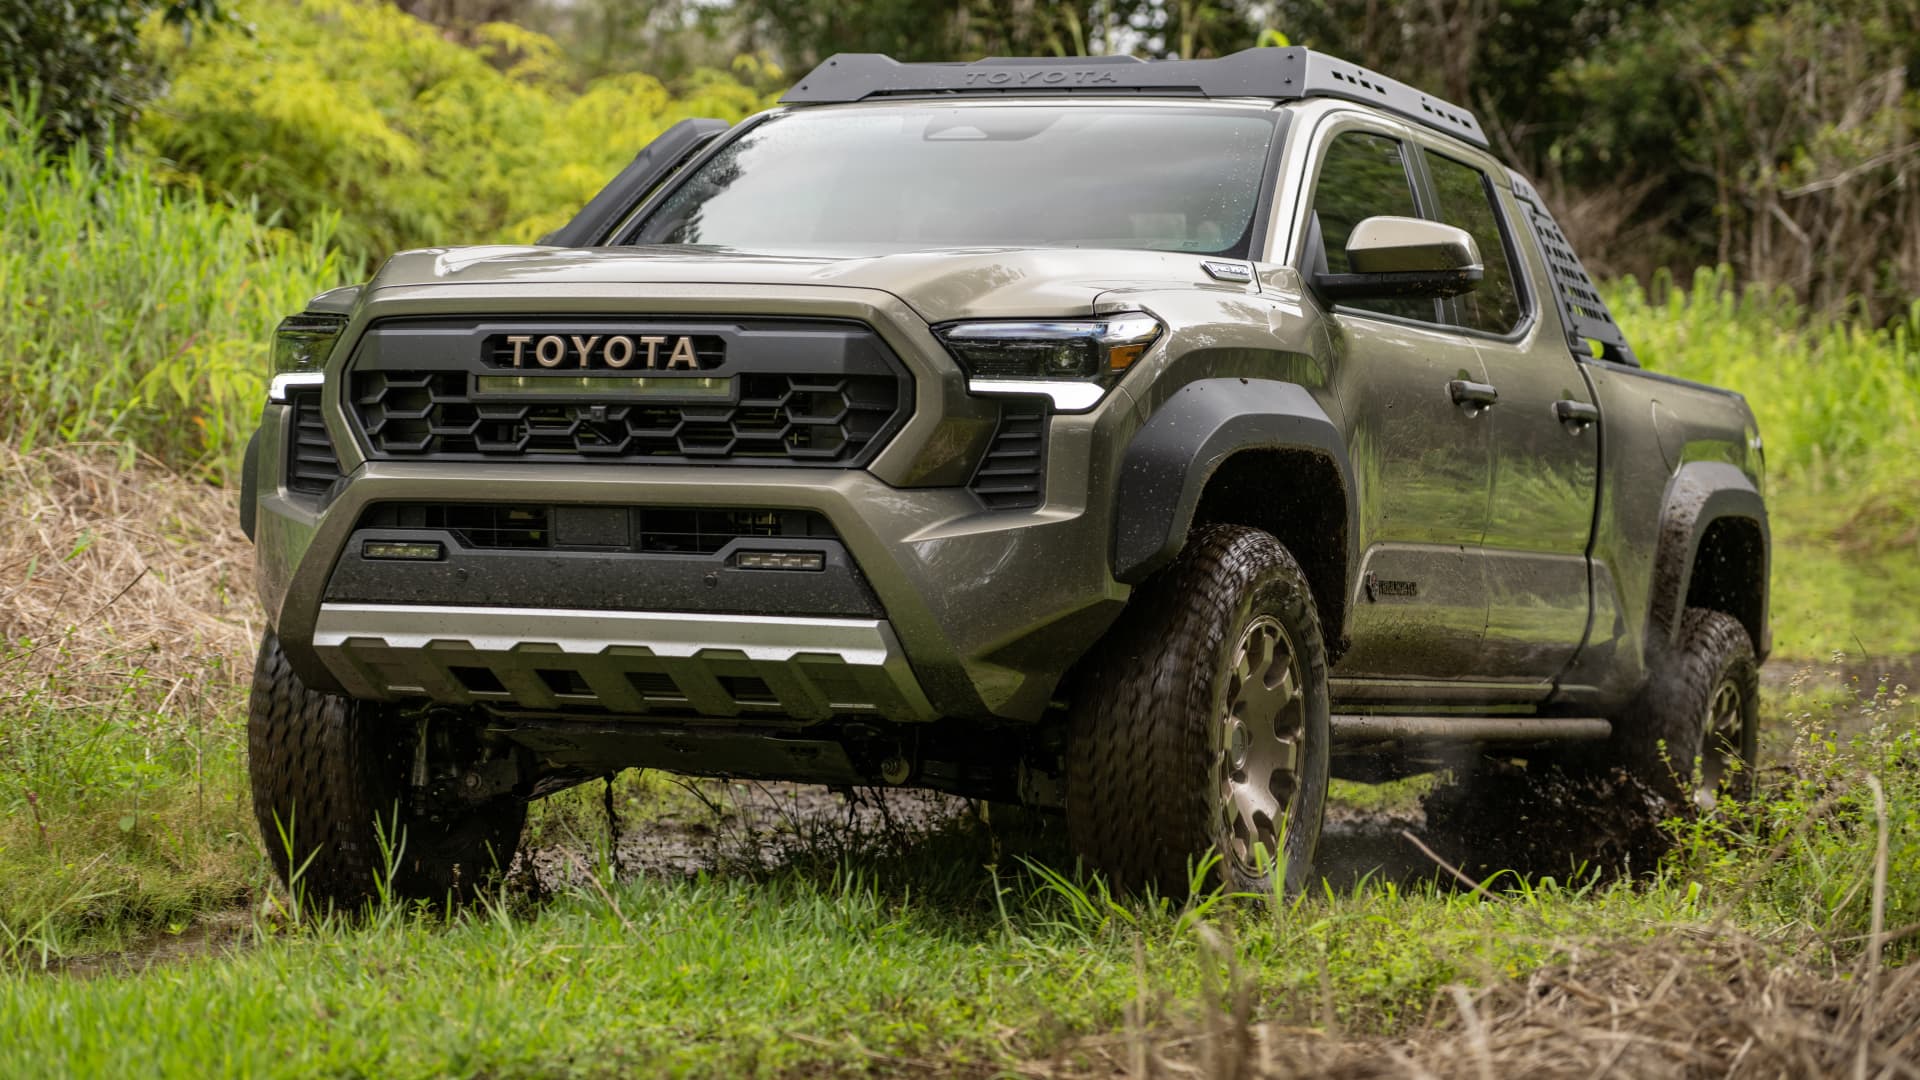 Toyota redesigns bestselling Tacoma pickup amid increased midsize competition Auto Recent